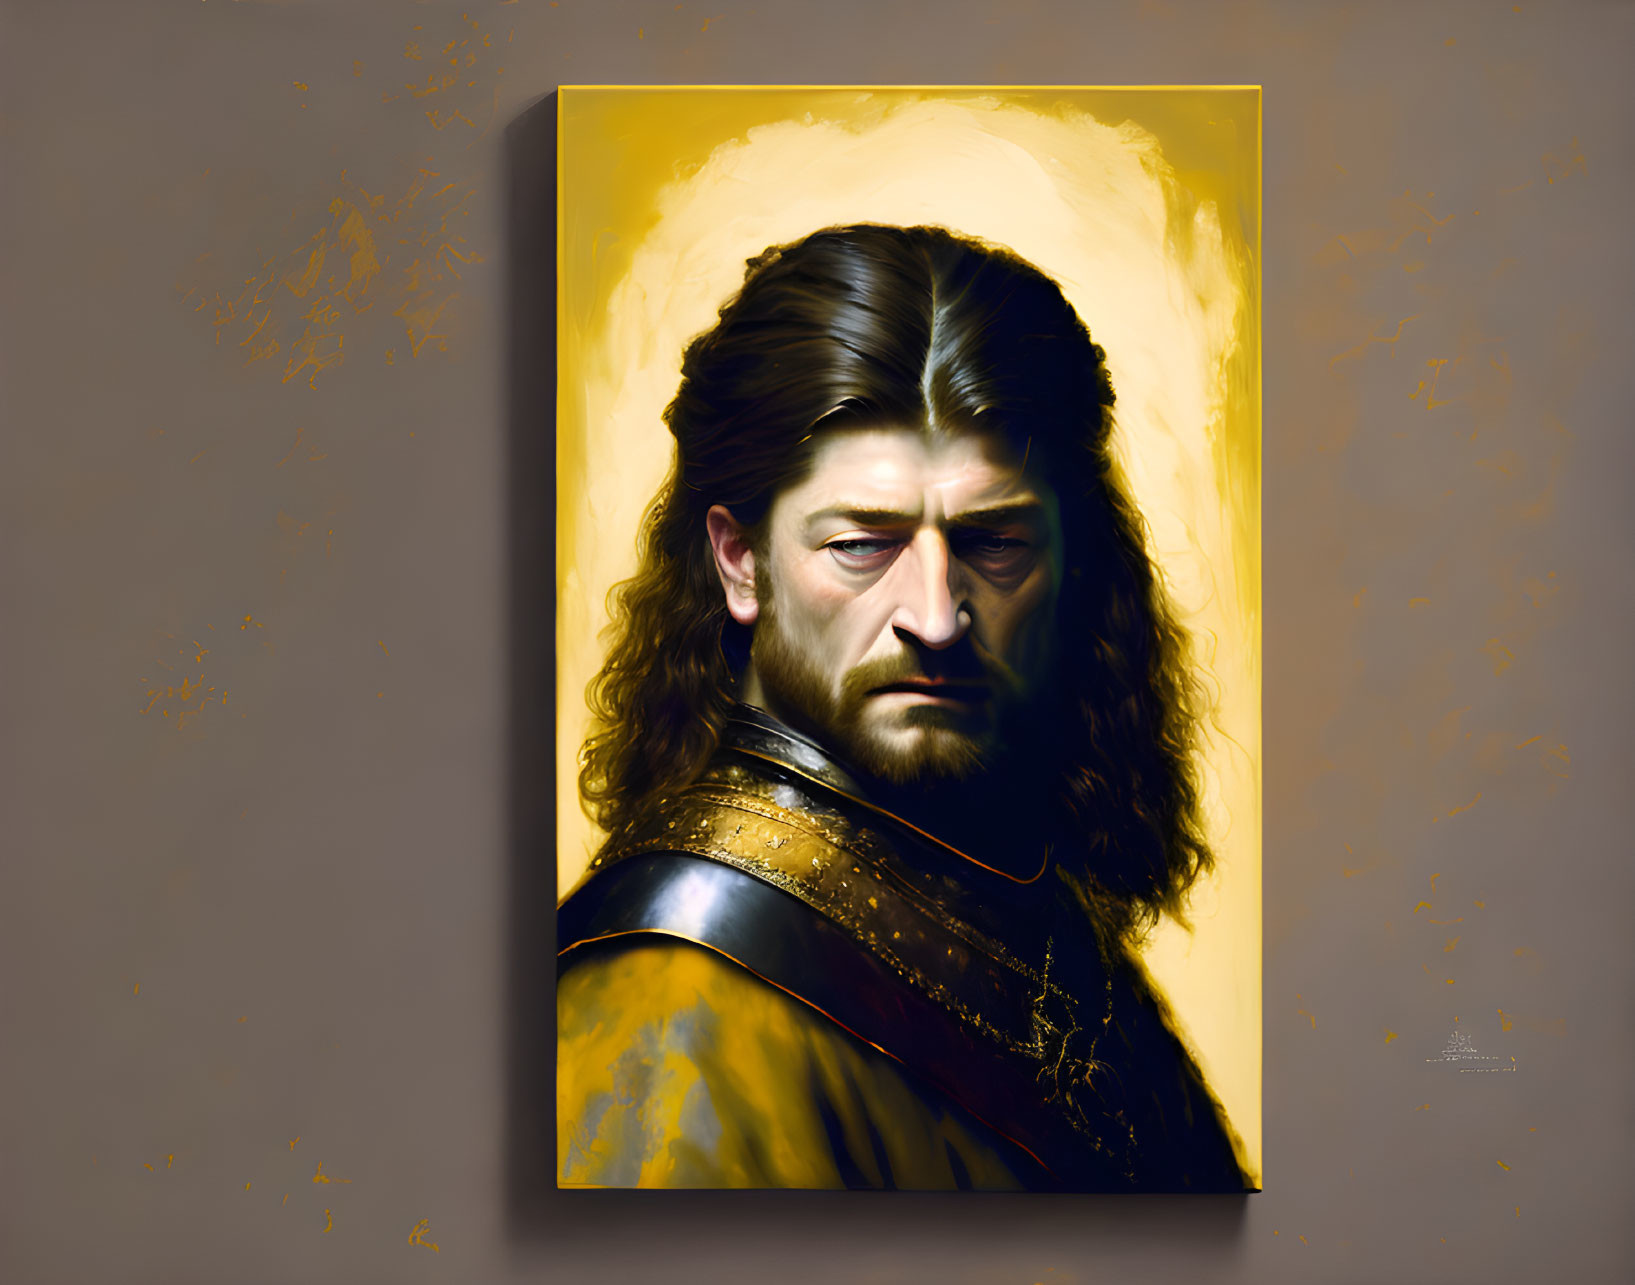 Medieval armor-clad man with long hair and beard portrait on golden backdrop